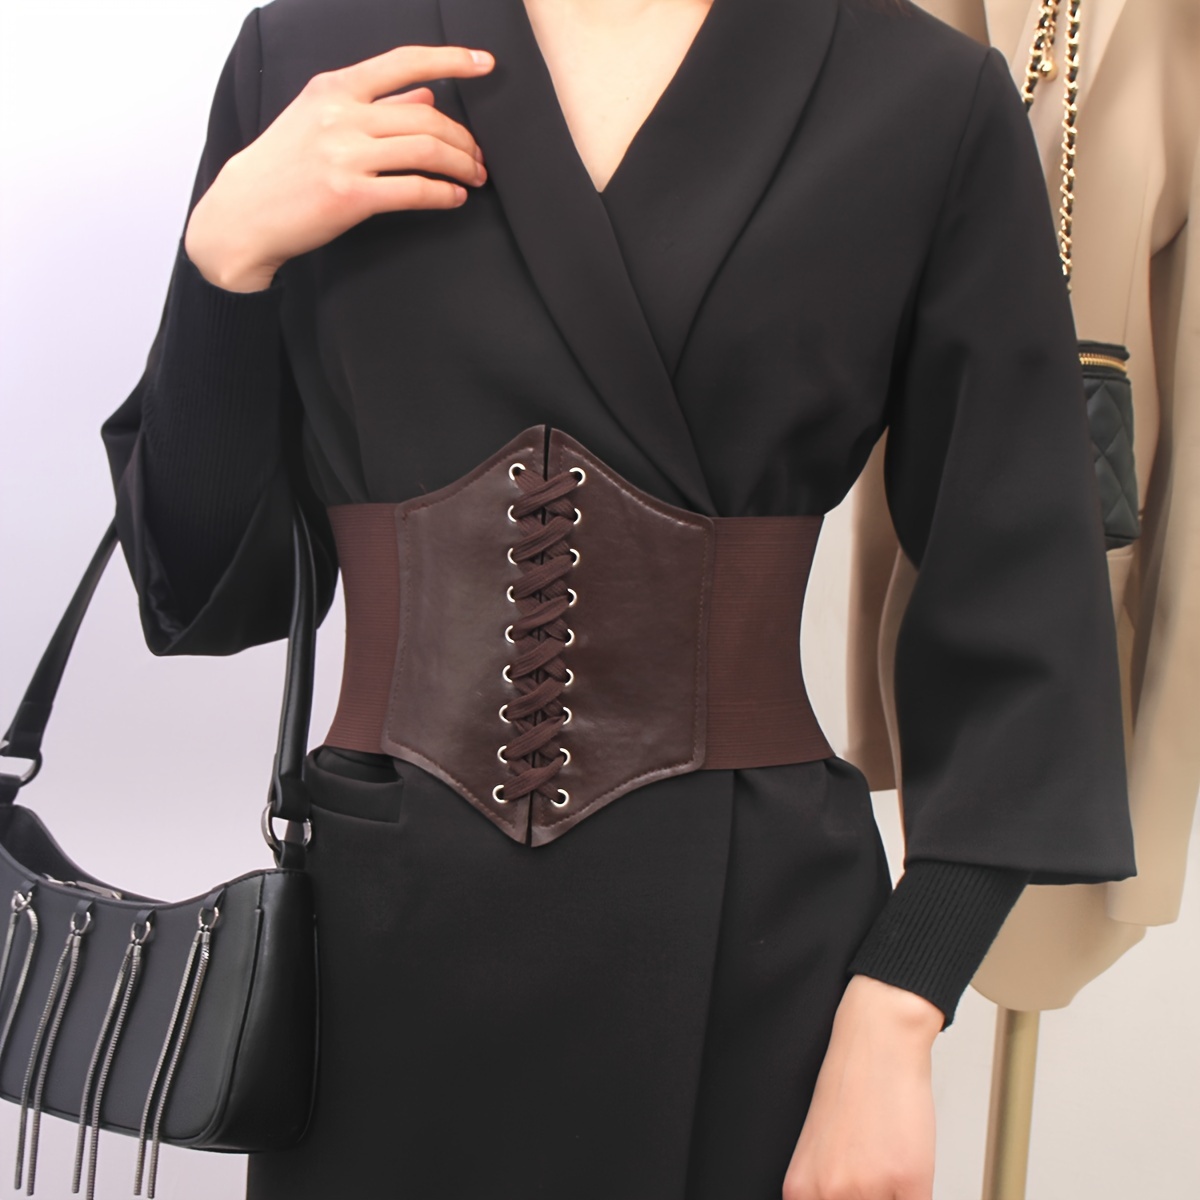 

Classic Lace Up Wide Belts Simple Casual Black Pu Corset Belt Adjustable Waspie Waistband Vintage Dress Girdle For Women